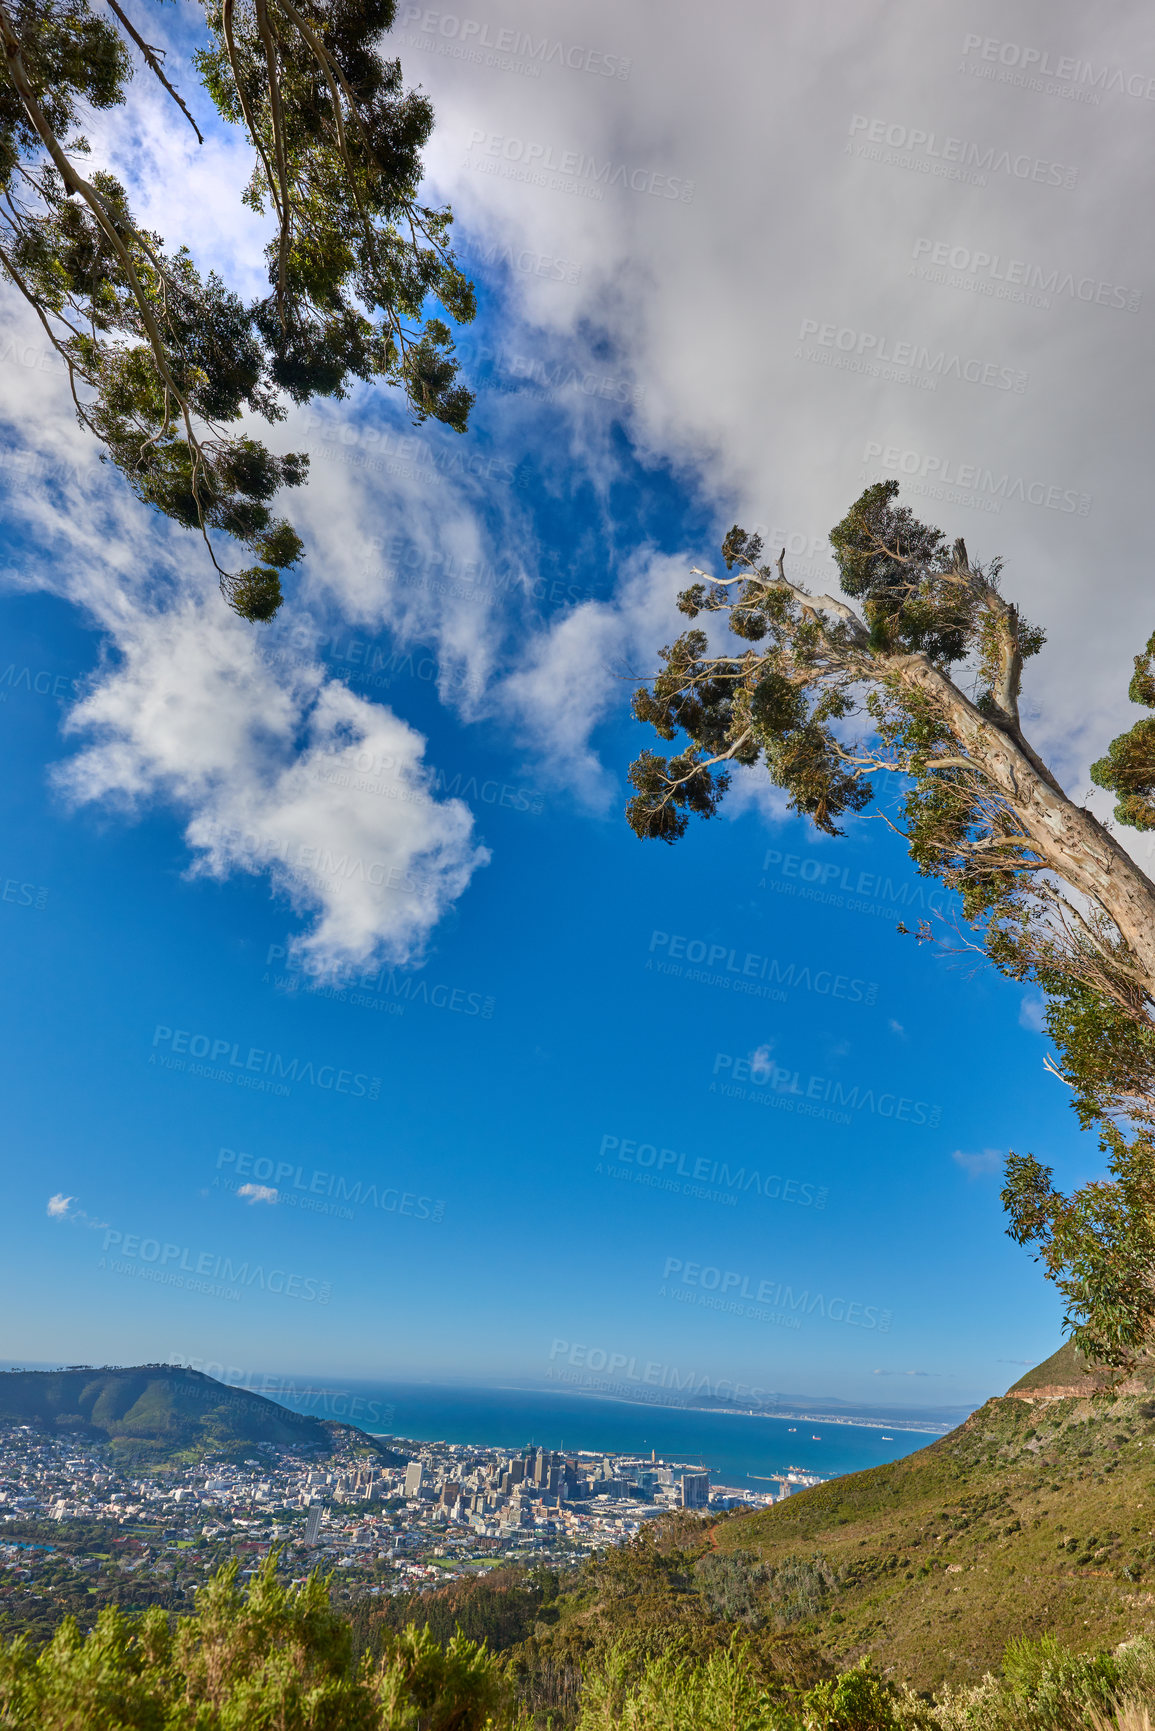 Buy stock photo Beautiful scenic view of a coastal city from a mountain peak with trees and plants against a cloudy blue sky background. Magnificent panoramic of a peaceful landscape at the sea to explore and travel